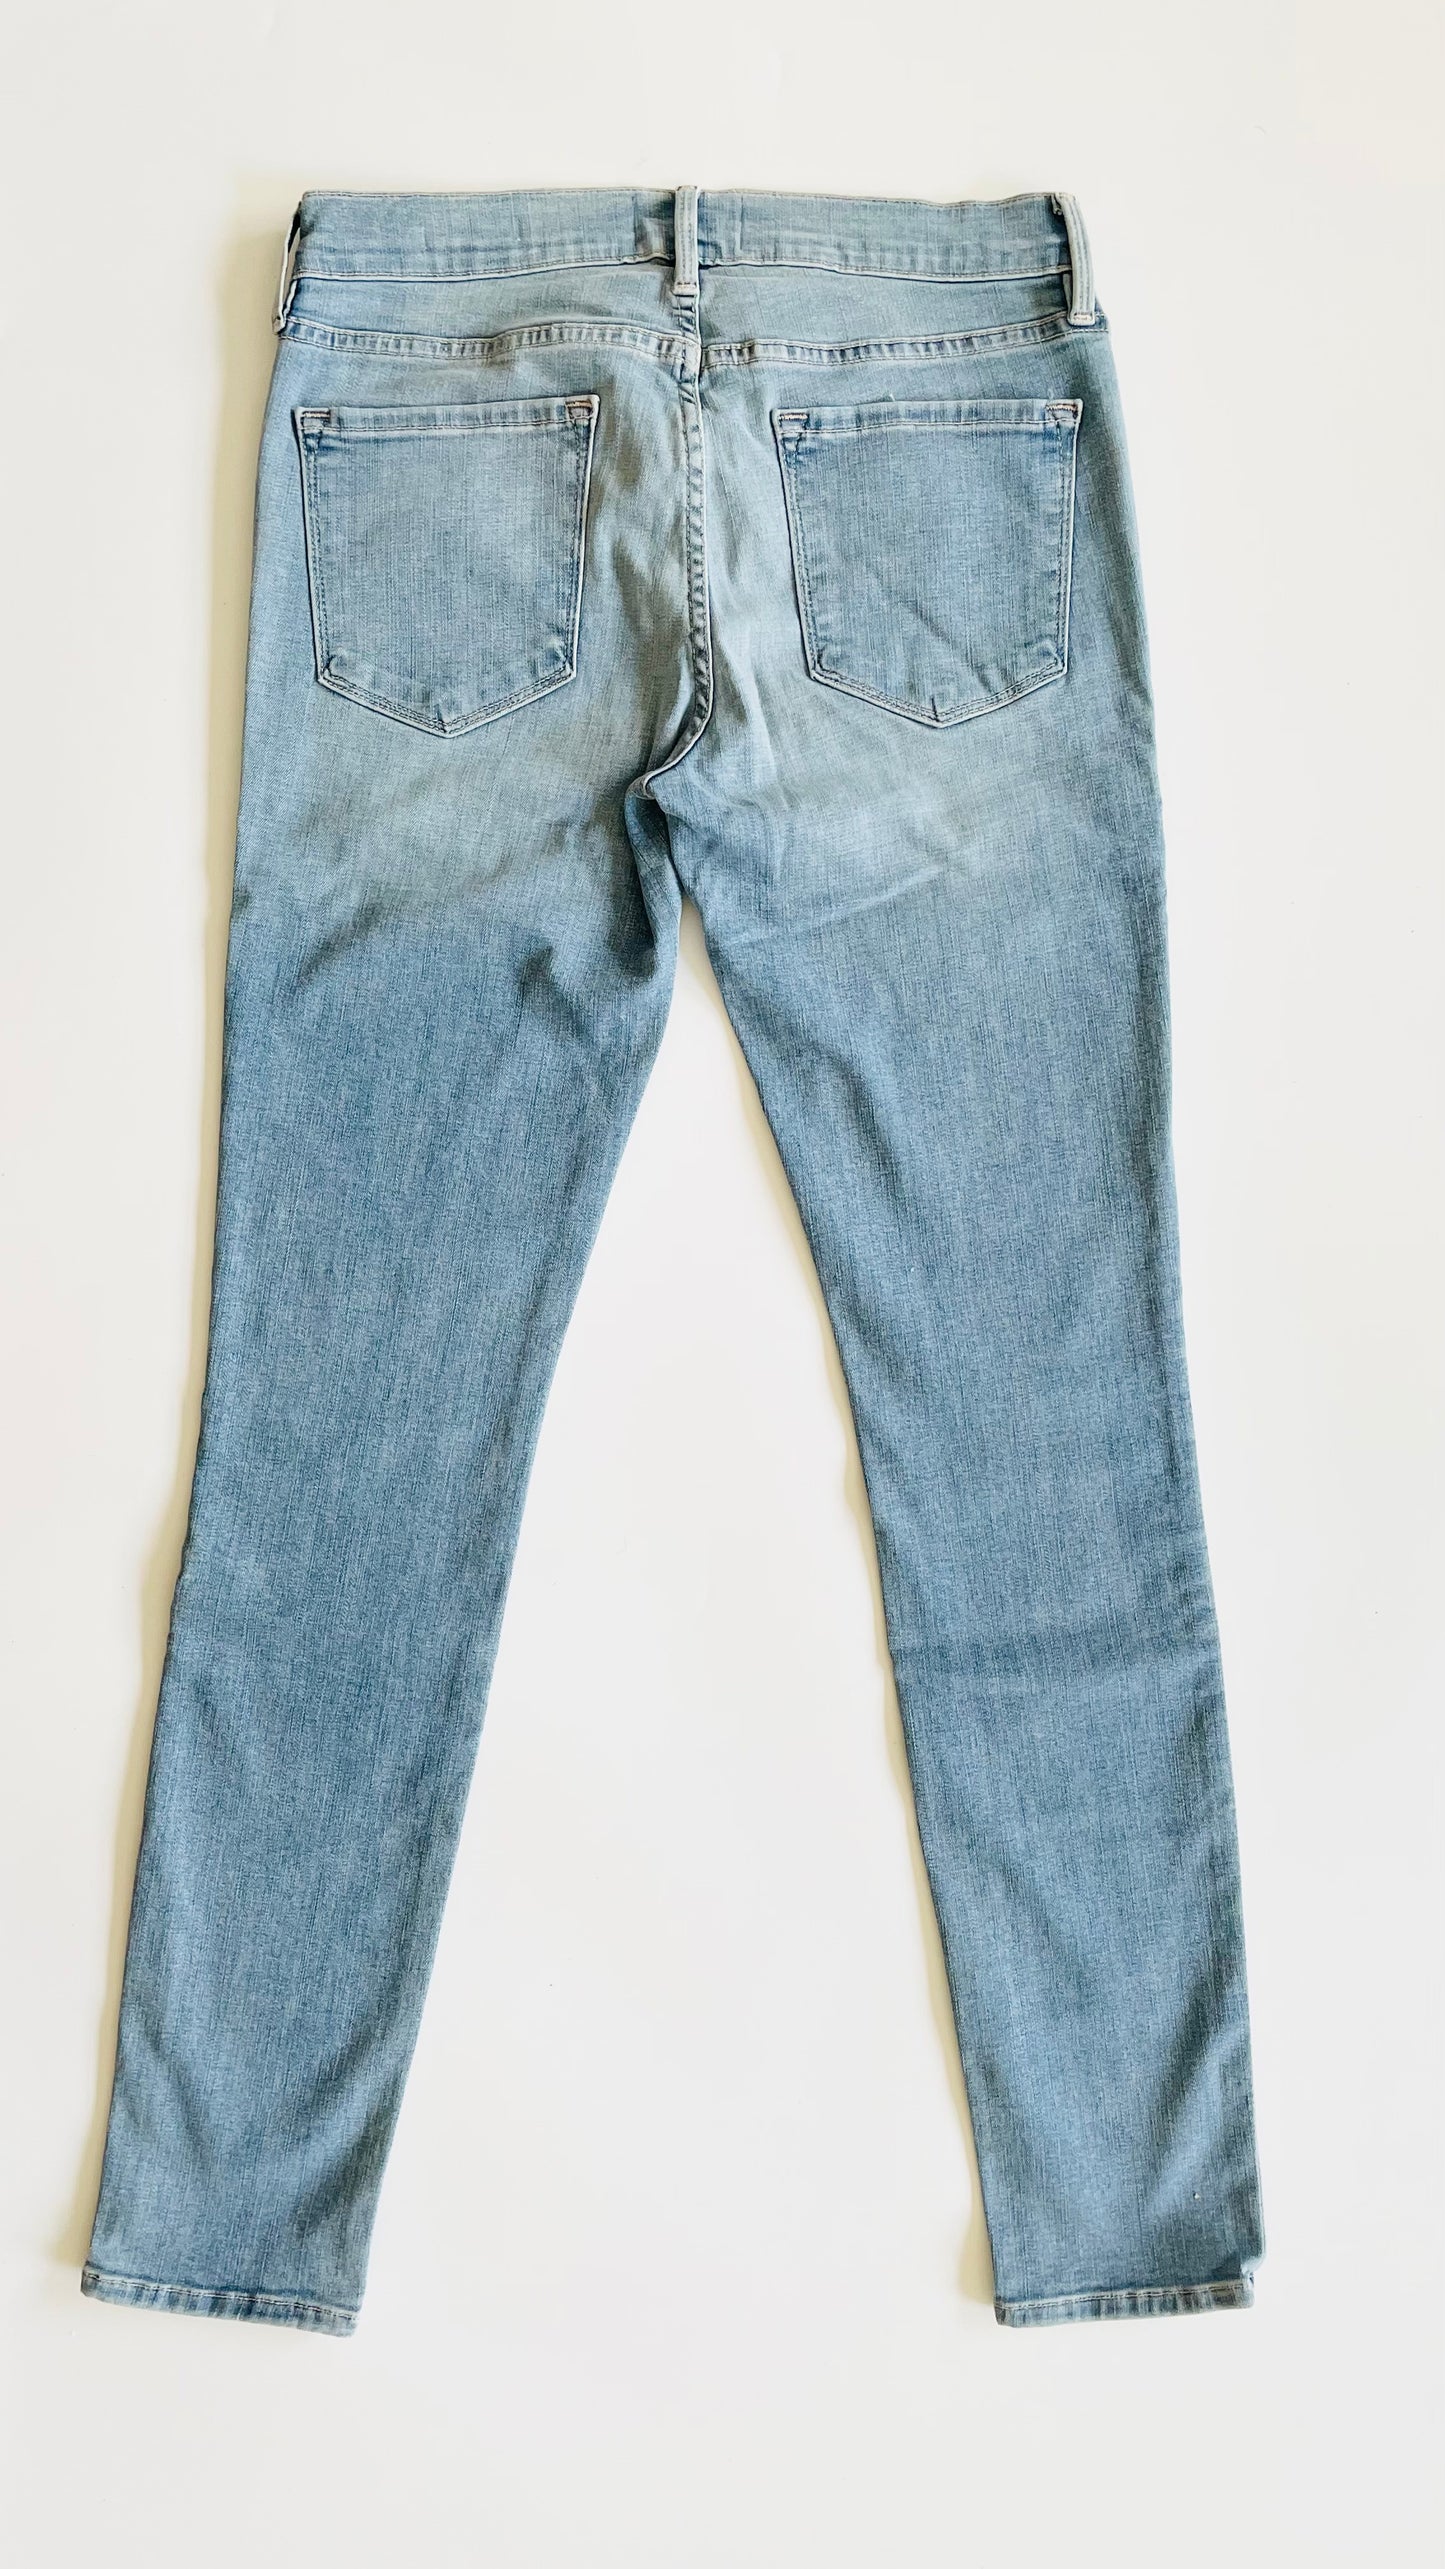 Pre-Loved FRAME light wash skinny jeans NWT - Size 29 x 30